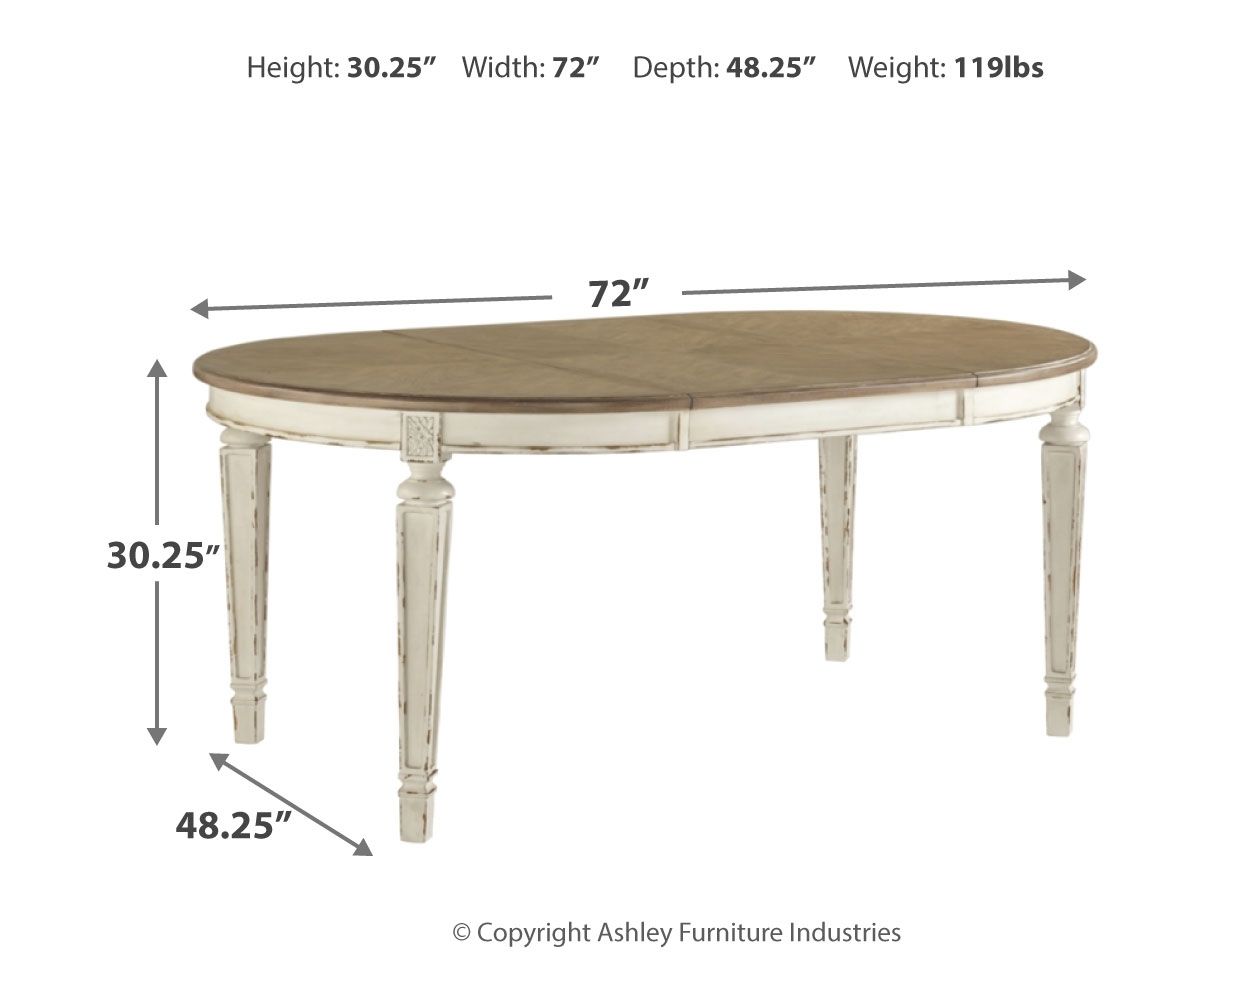 Realyn - Chipped White - Oval Dining Room Extension Table - Tony's Home Furnishings